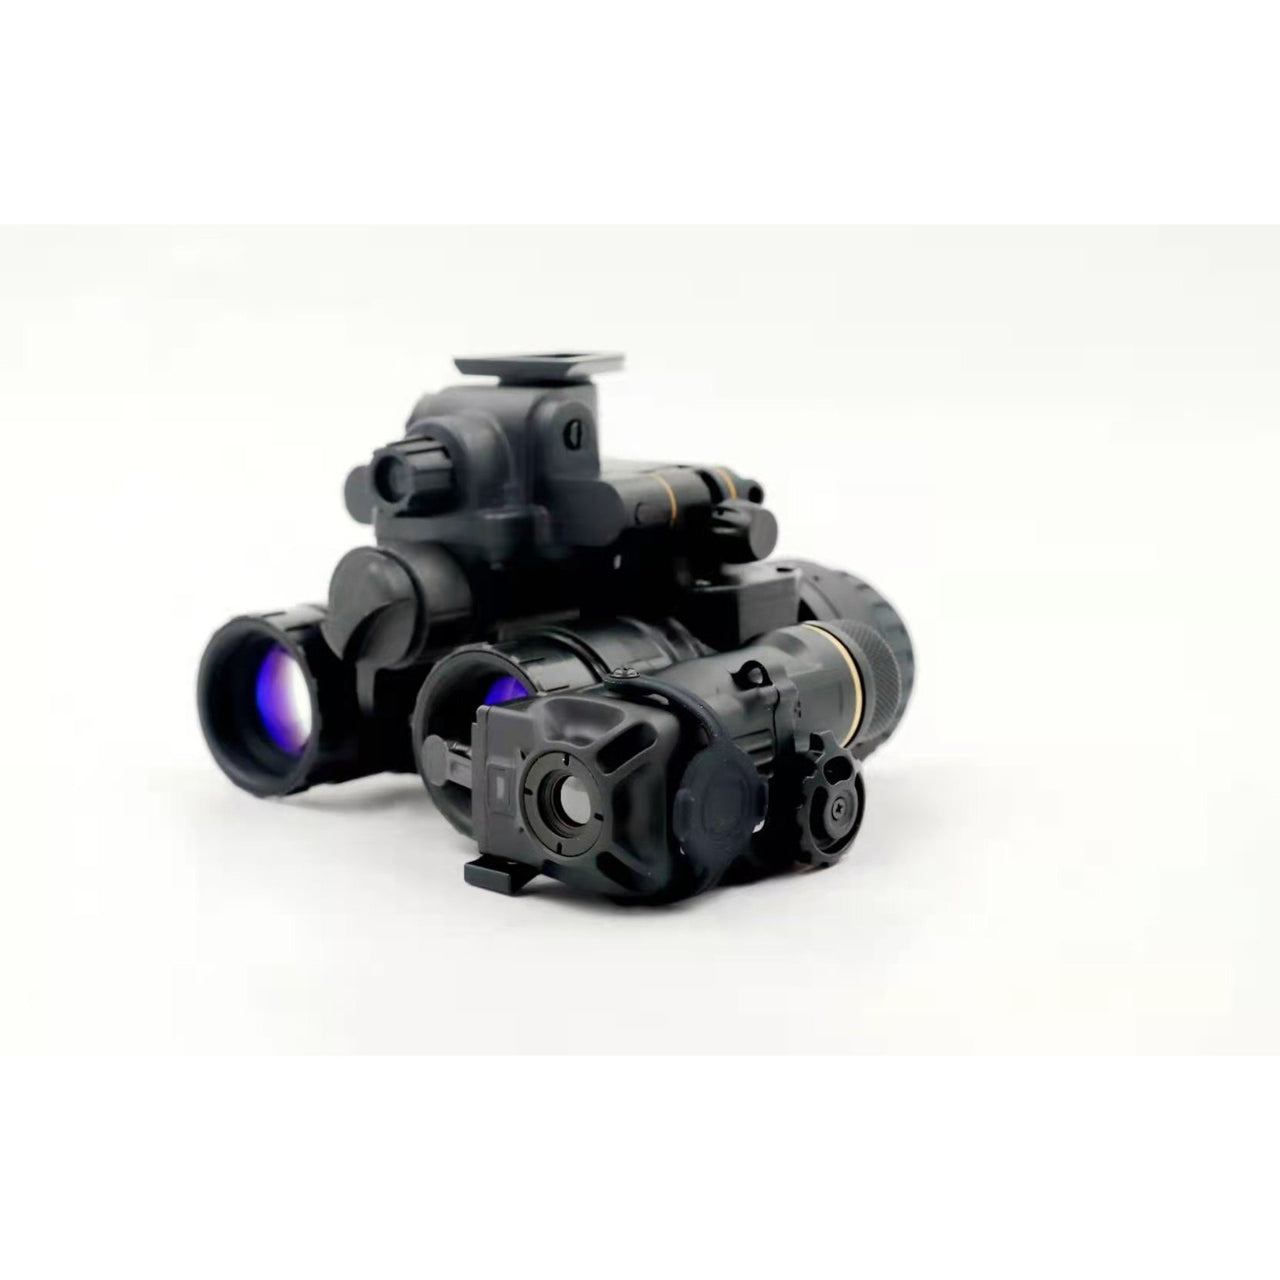 Jerry C Series Thermal Imager CE5